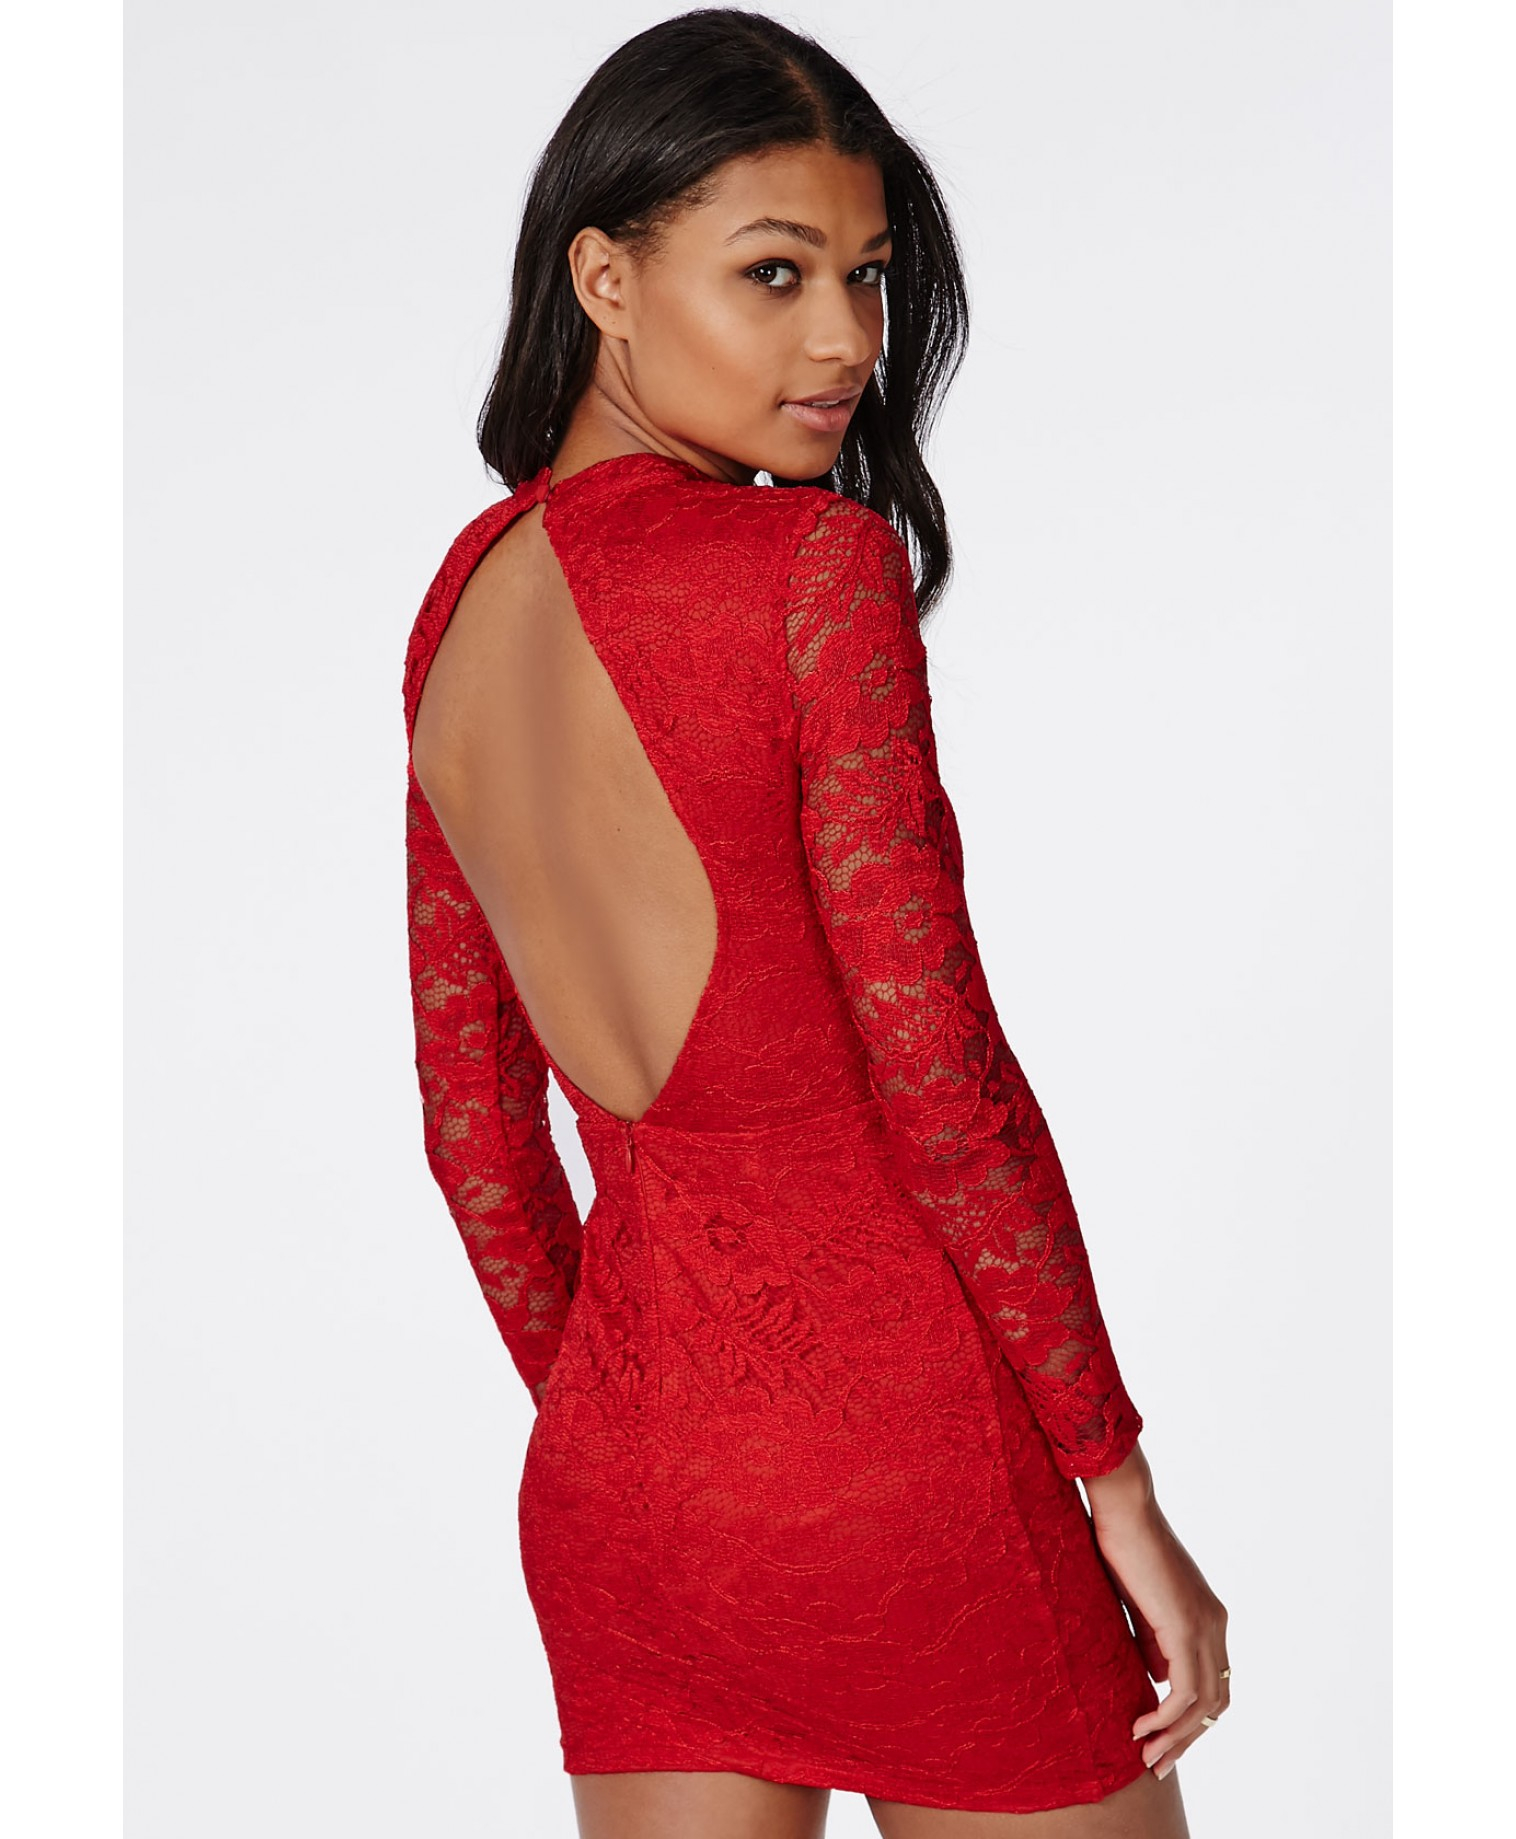 Bodycon dresses long sleeve red lace